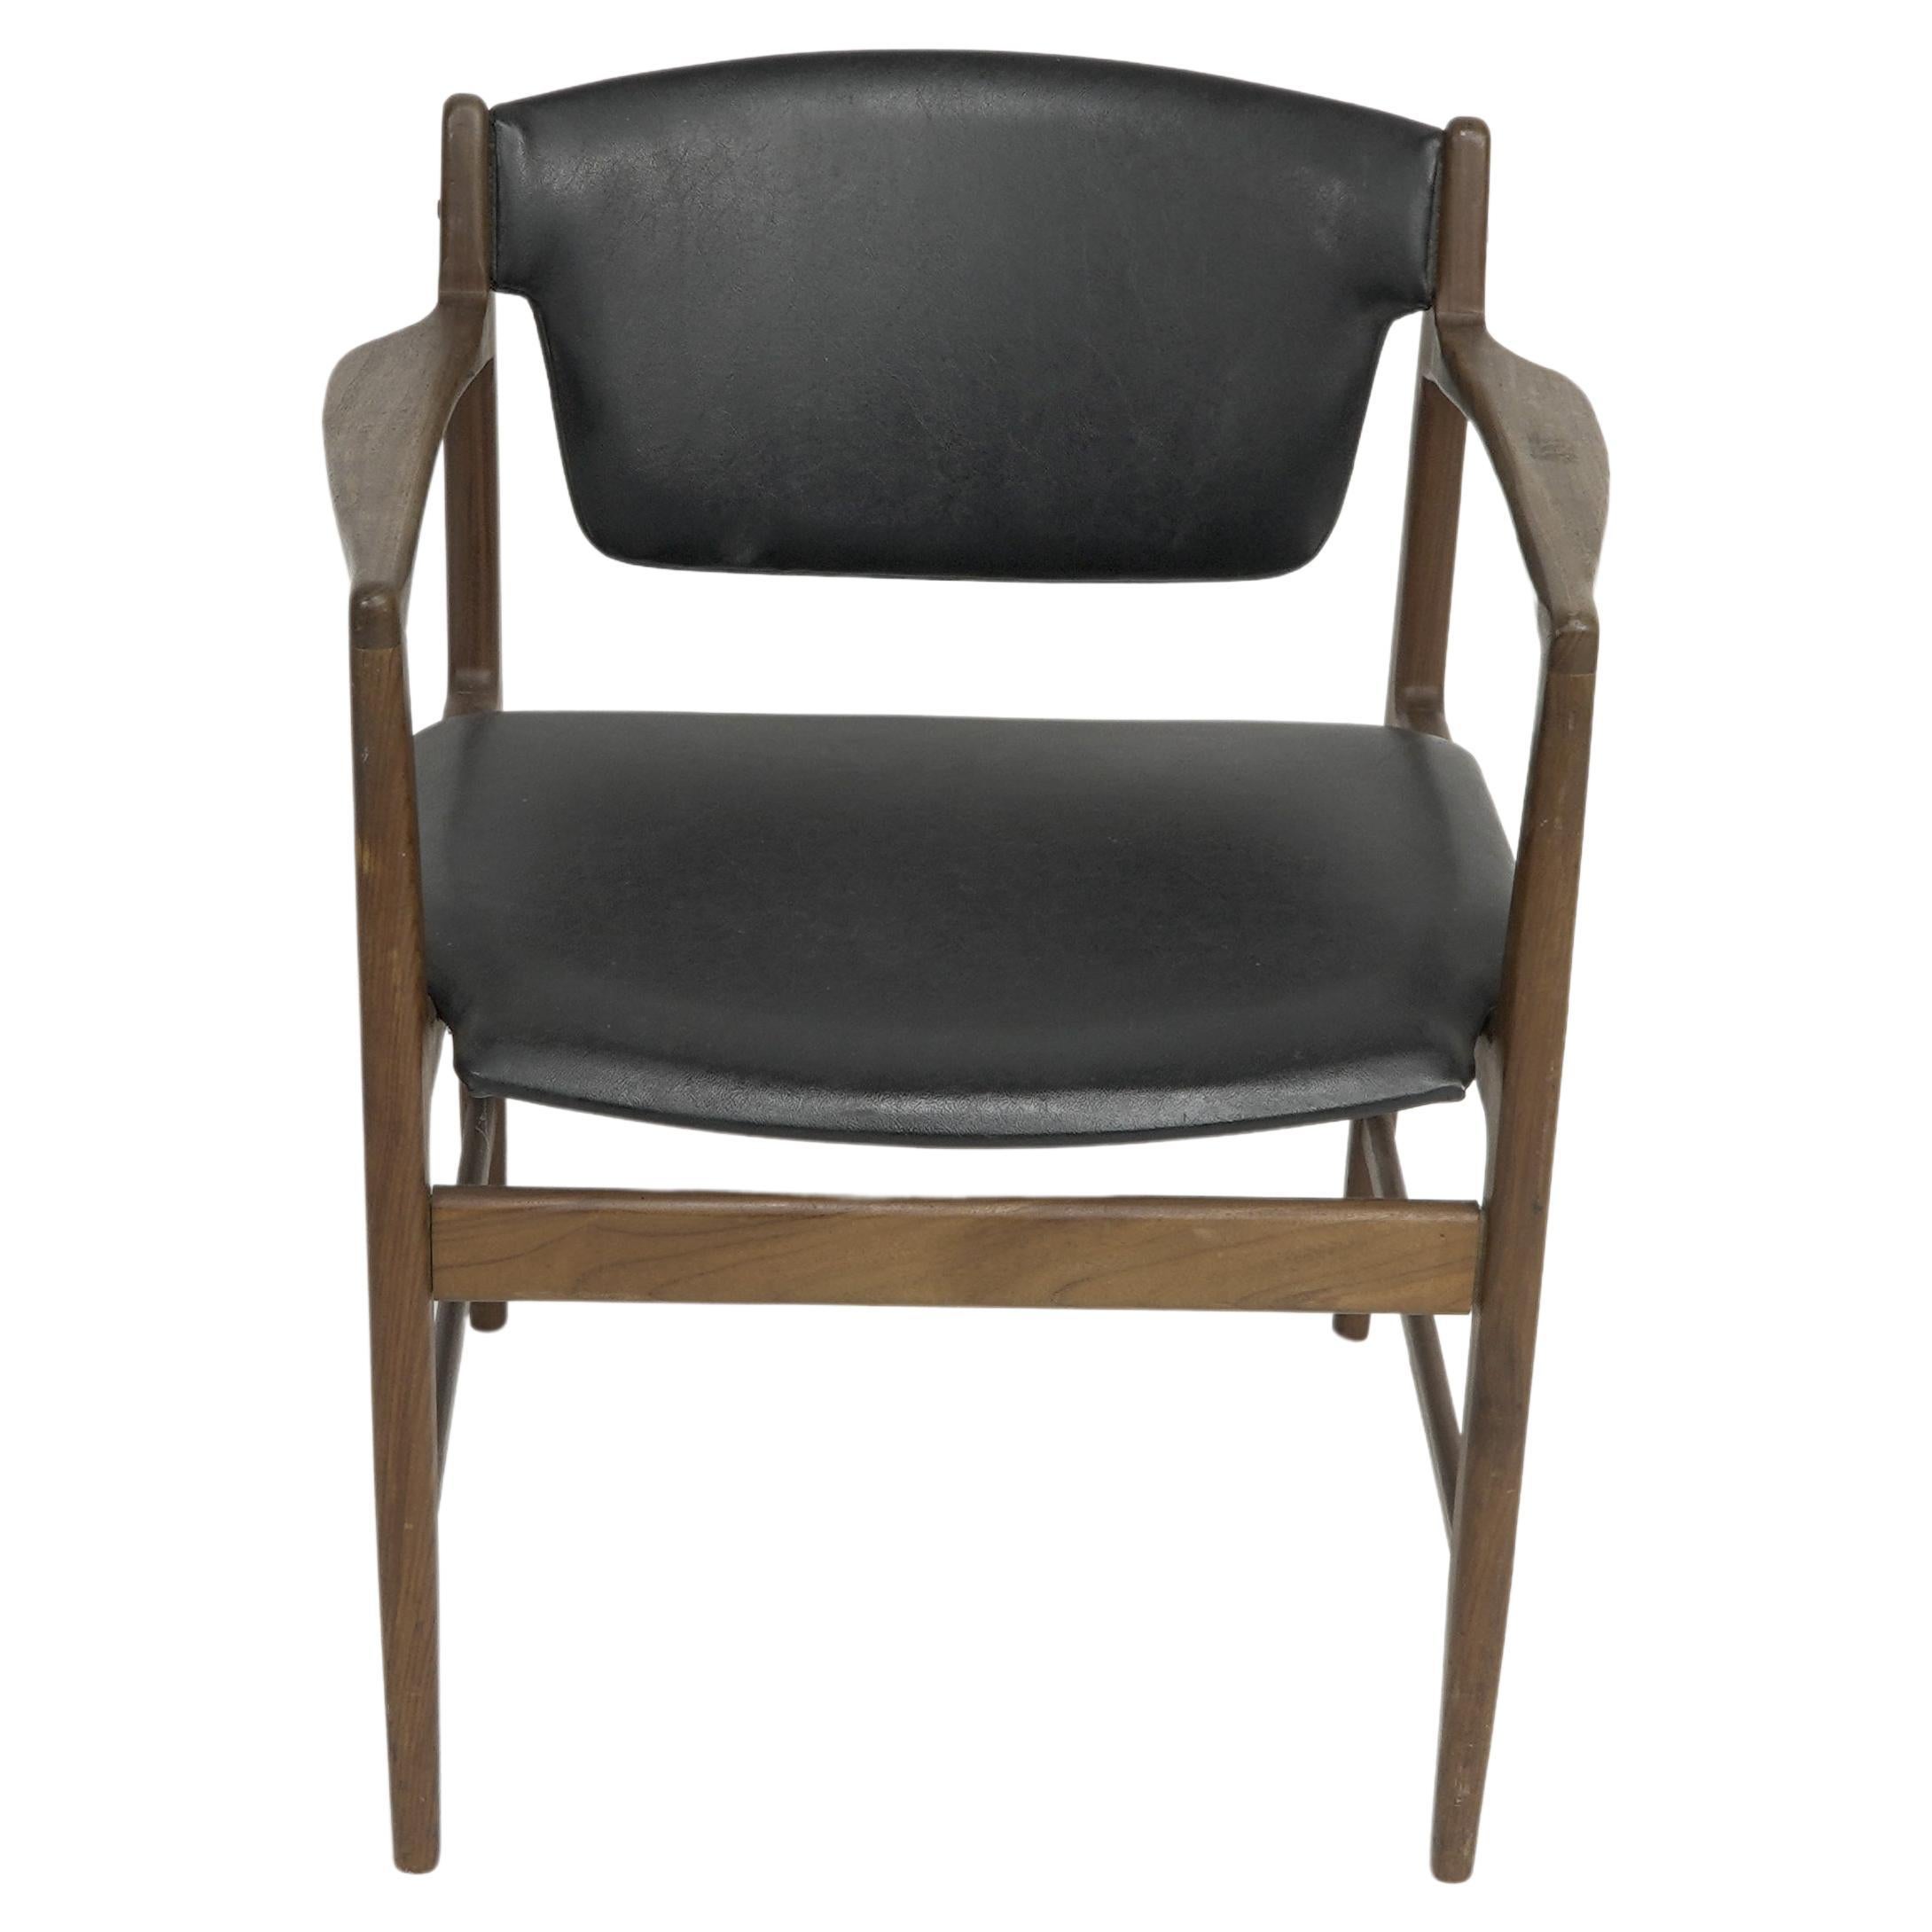 Ib Kofod Larsen for G-Plan Danish Design Range. Teak armchair with gold G Plan stamp and faded Kofod signature underneath the seat . Some tears to sides of seat.